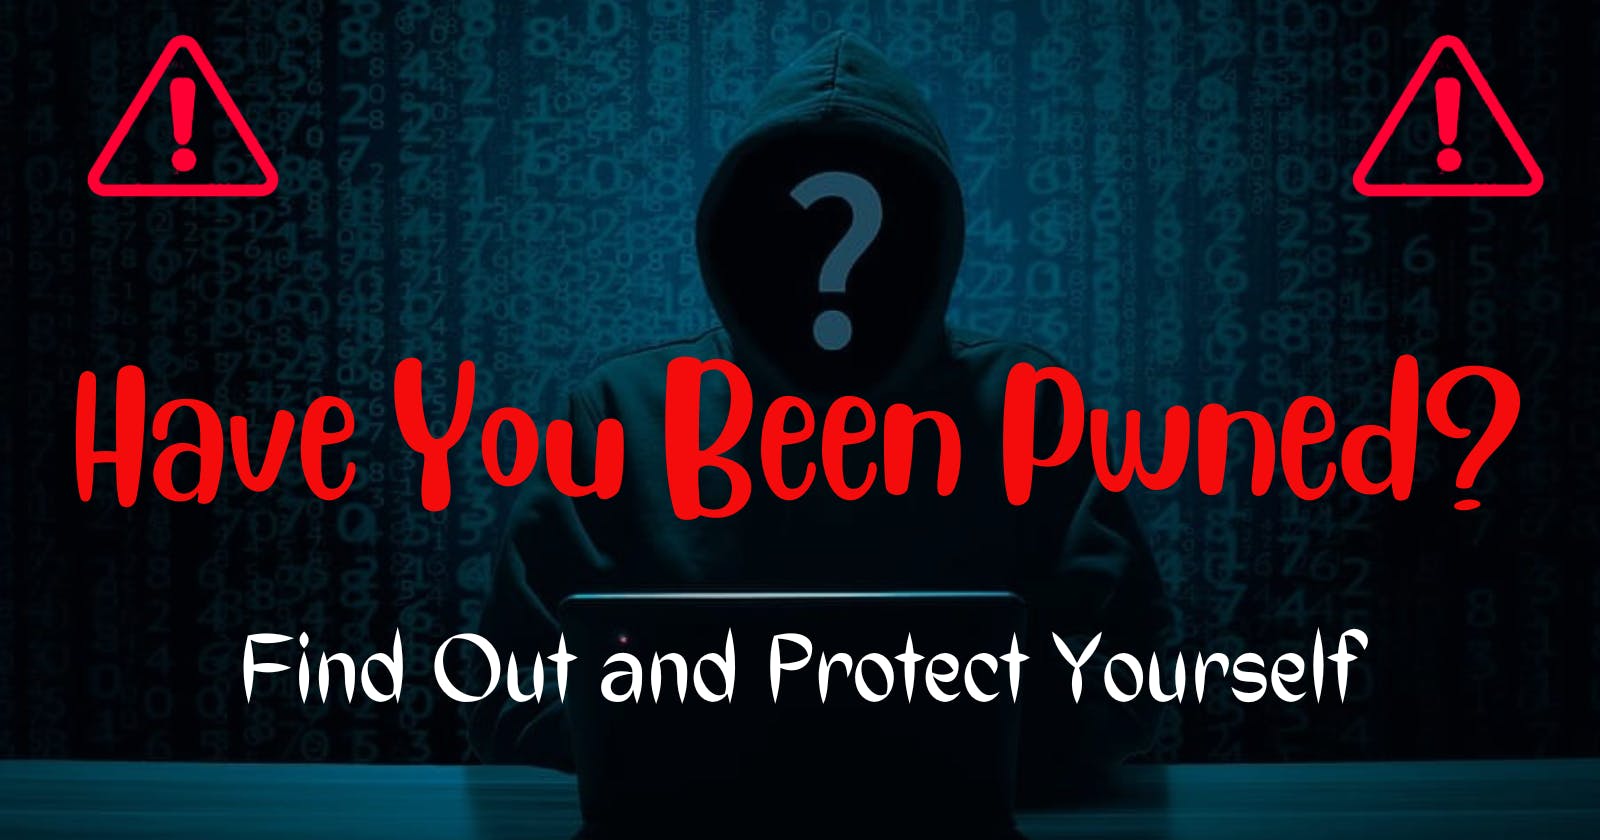 Have You Been Pwned? Find Out and Protect Yourself